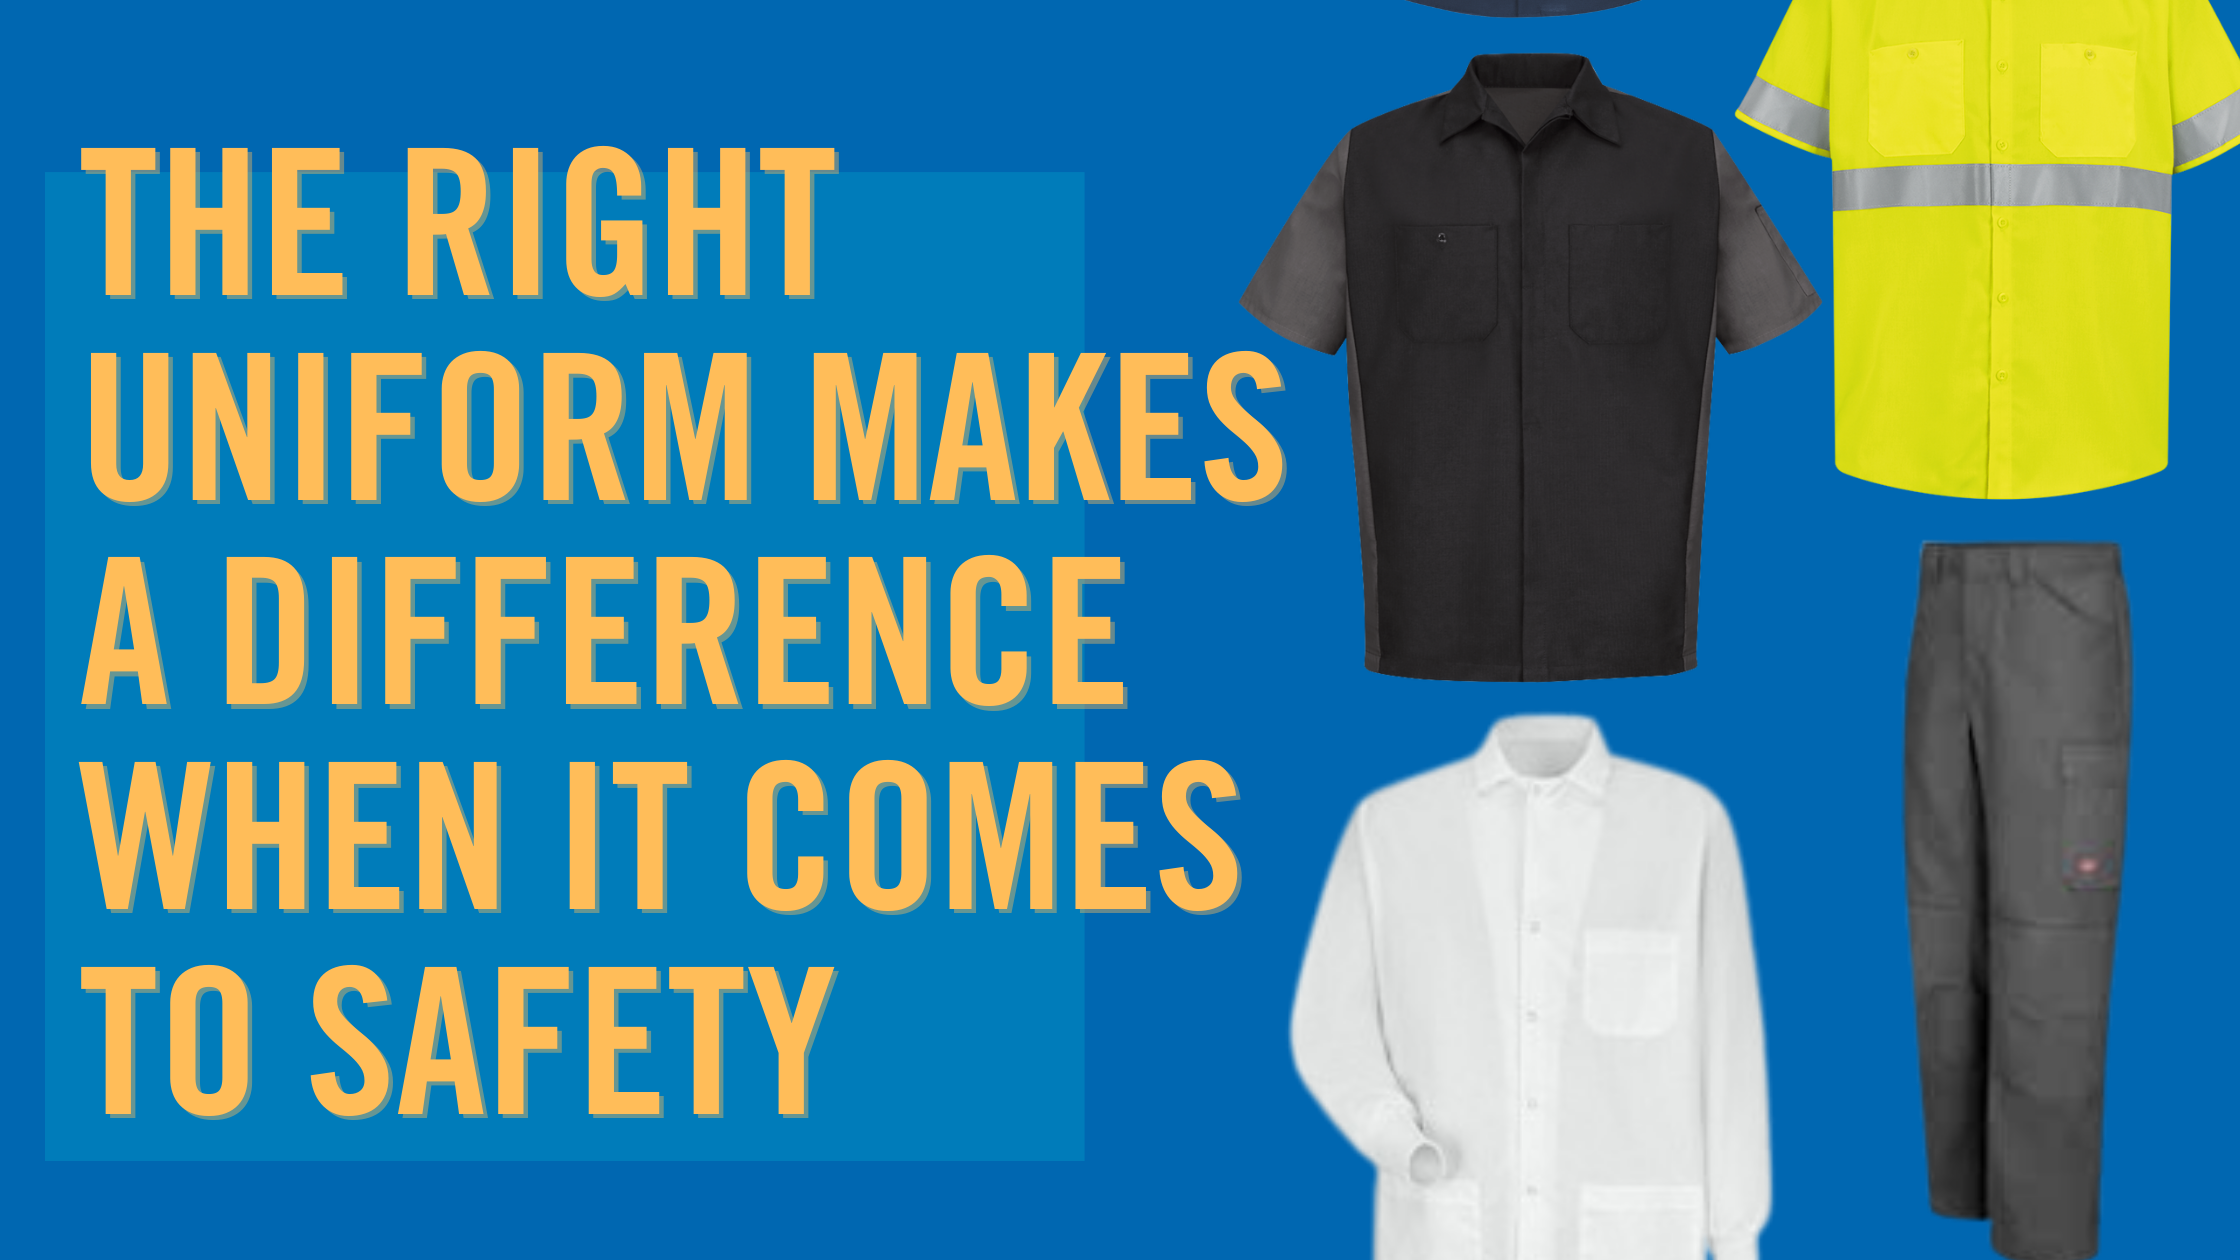 The right uniform makes a difference when it comes to safety